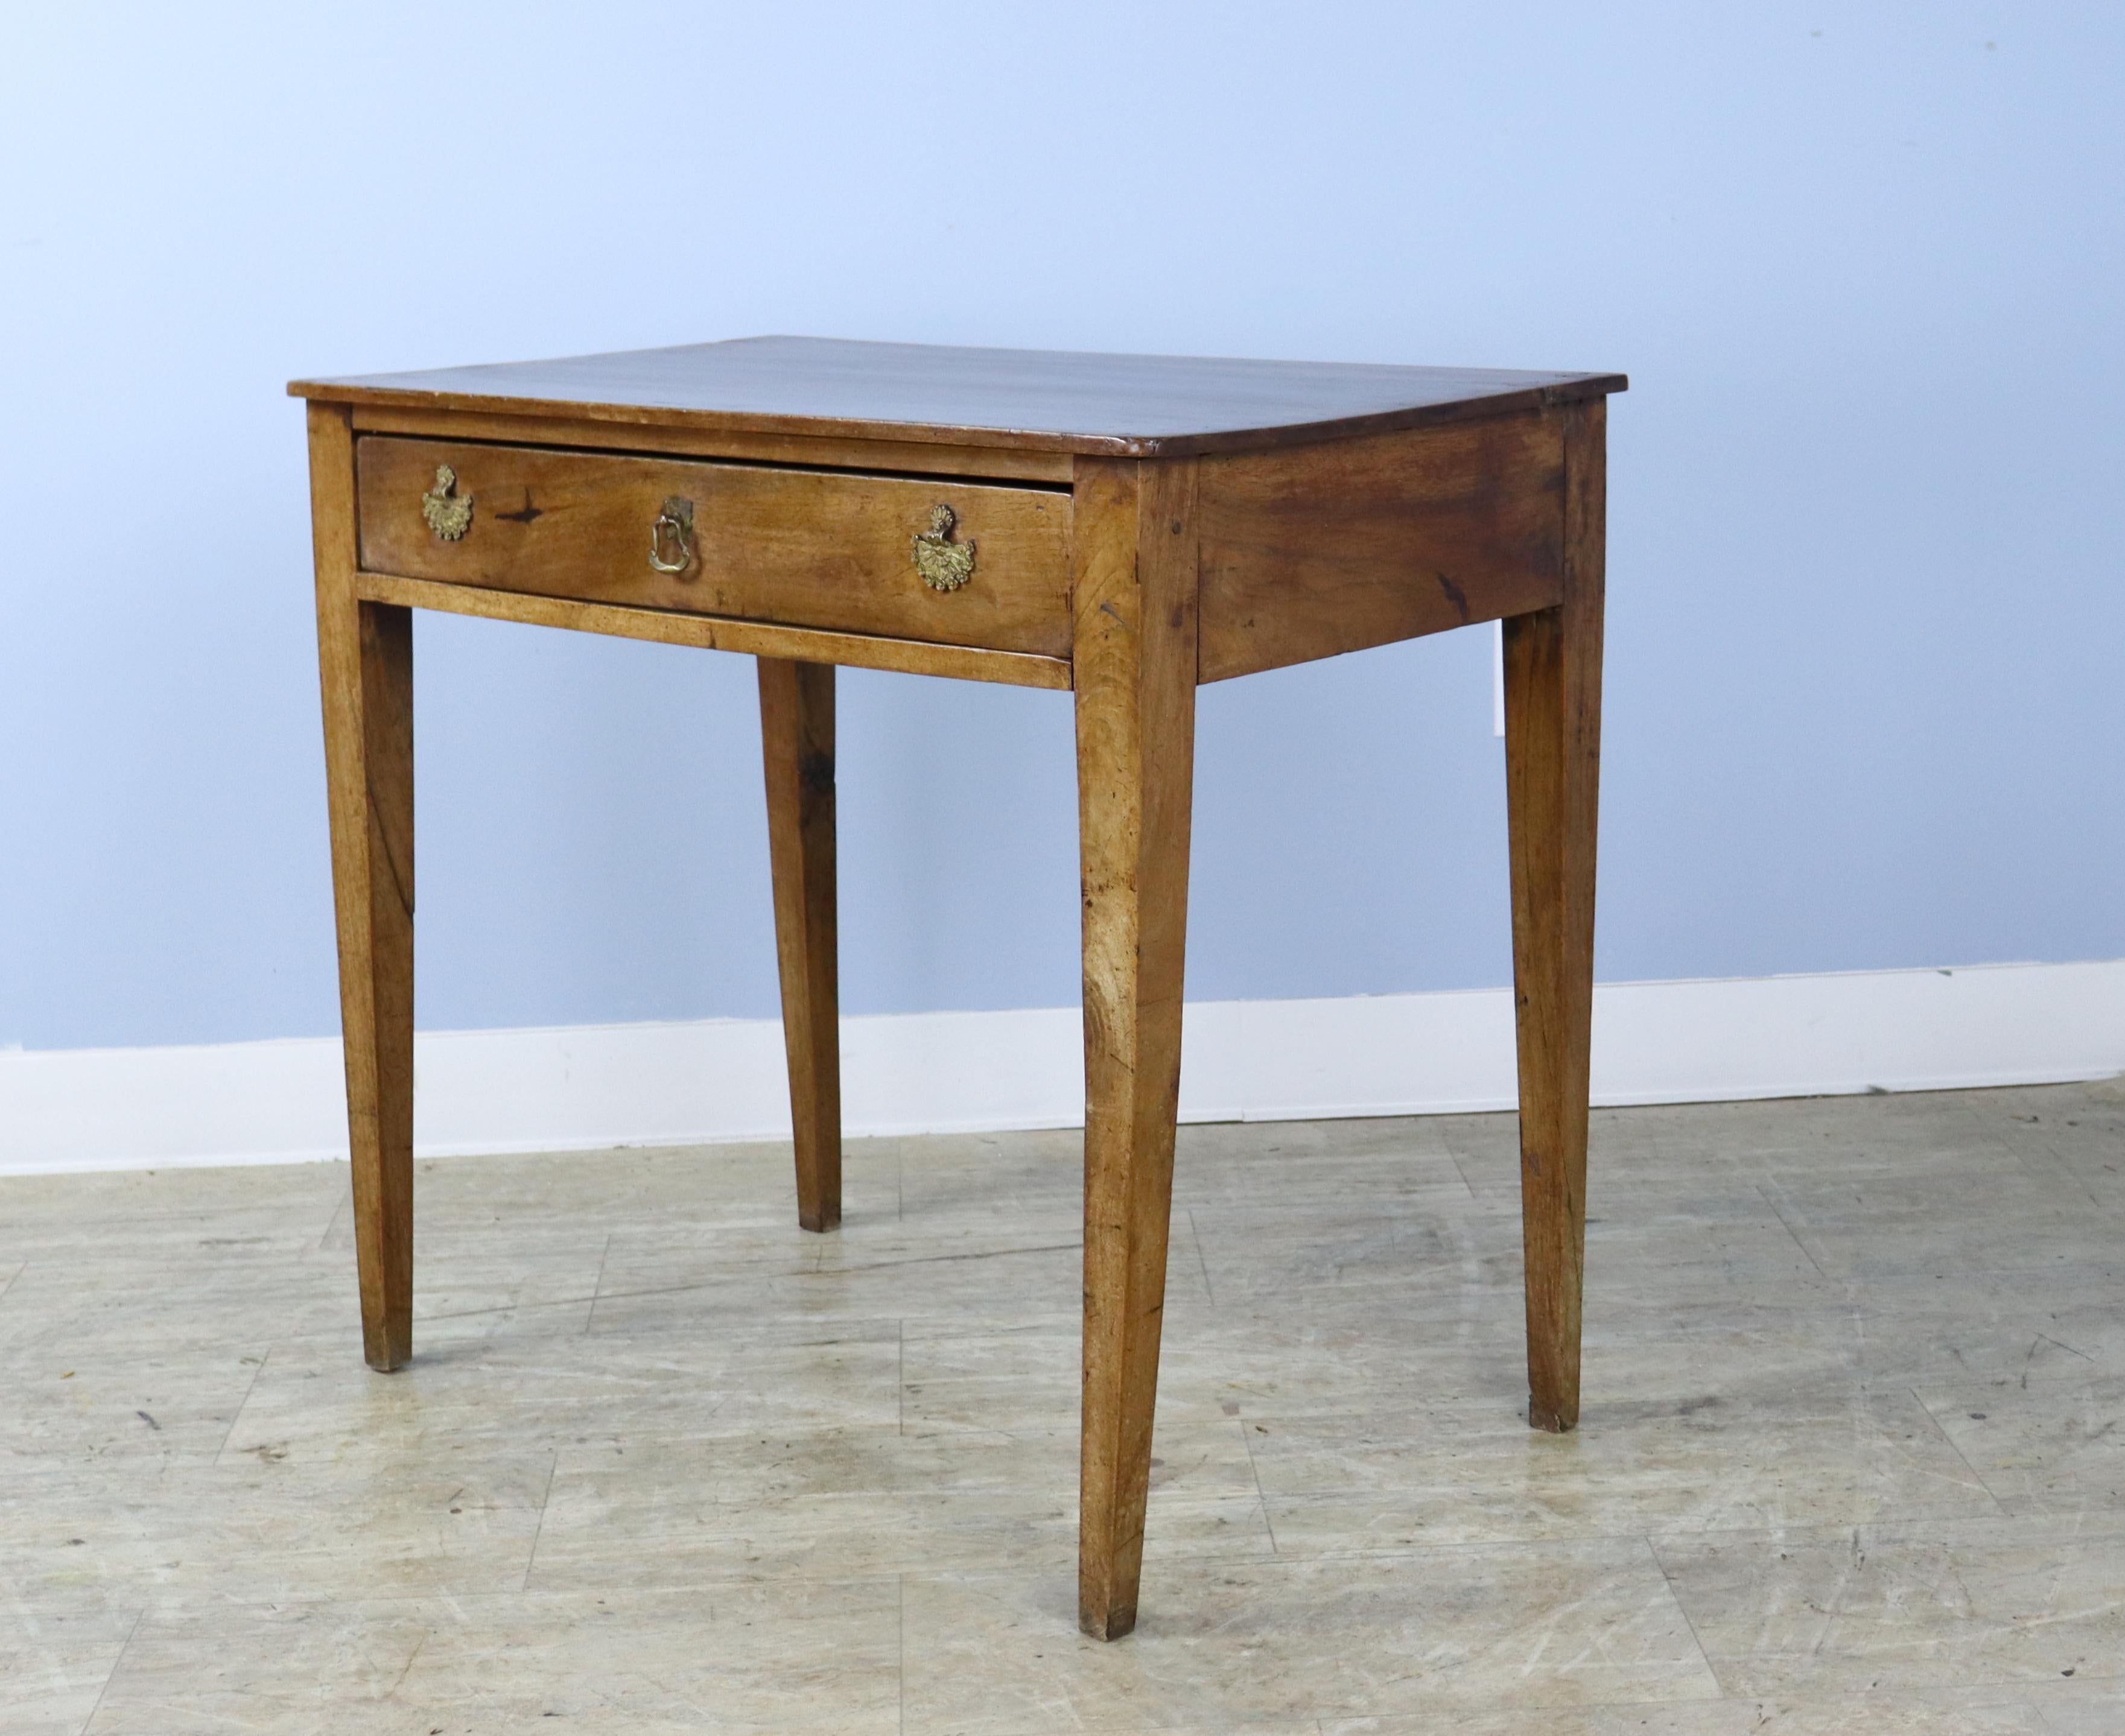 19th Century French Walnut Side Table with Decorative Escutcheons